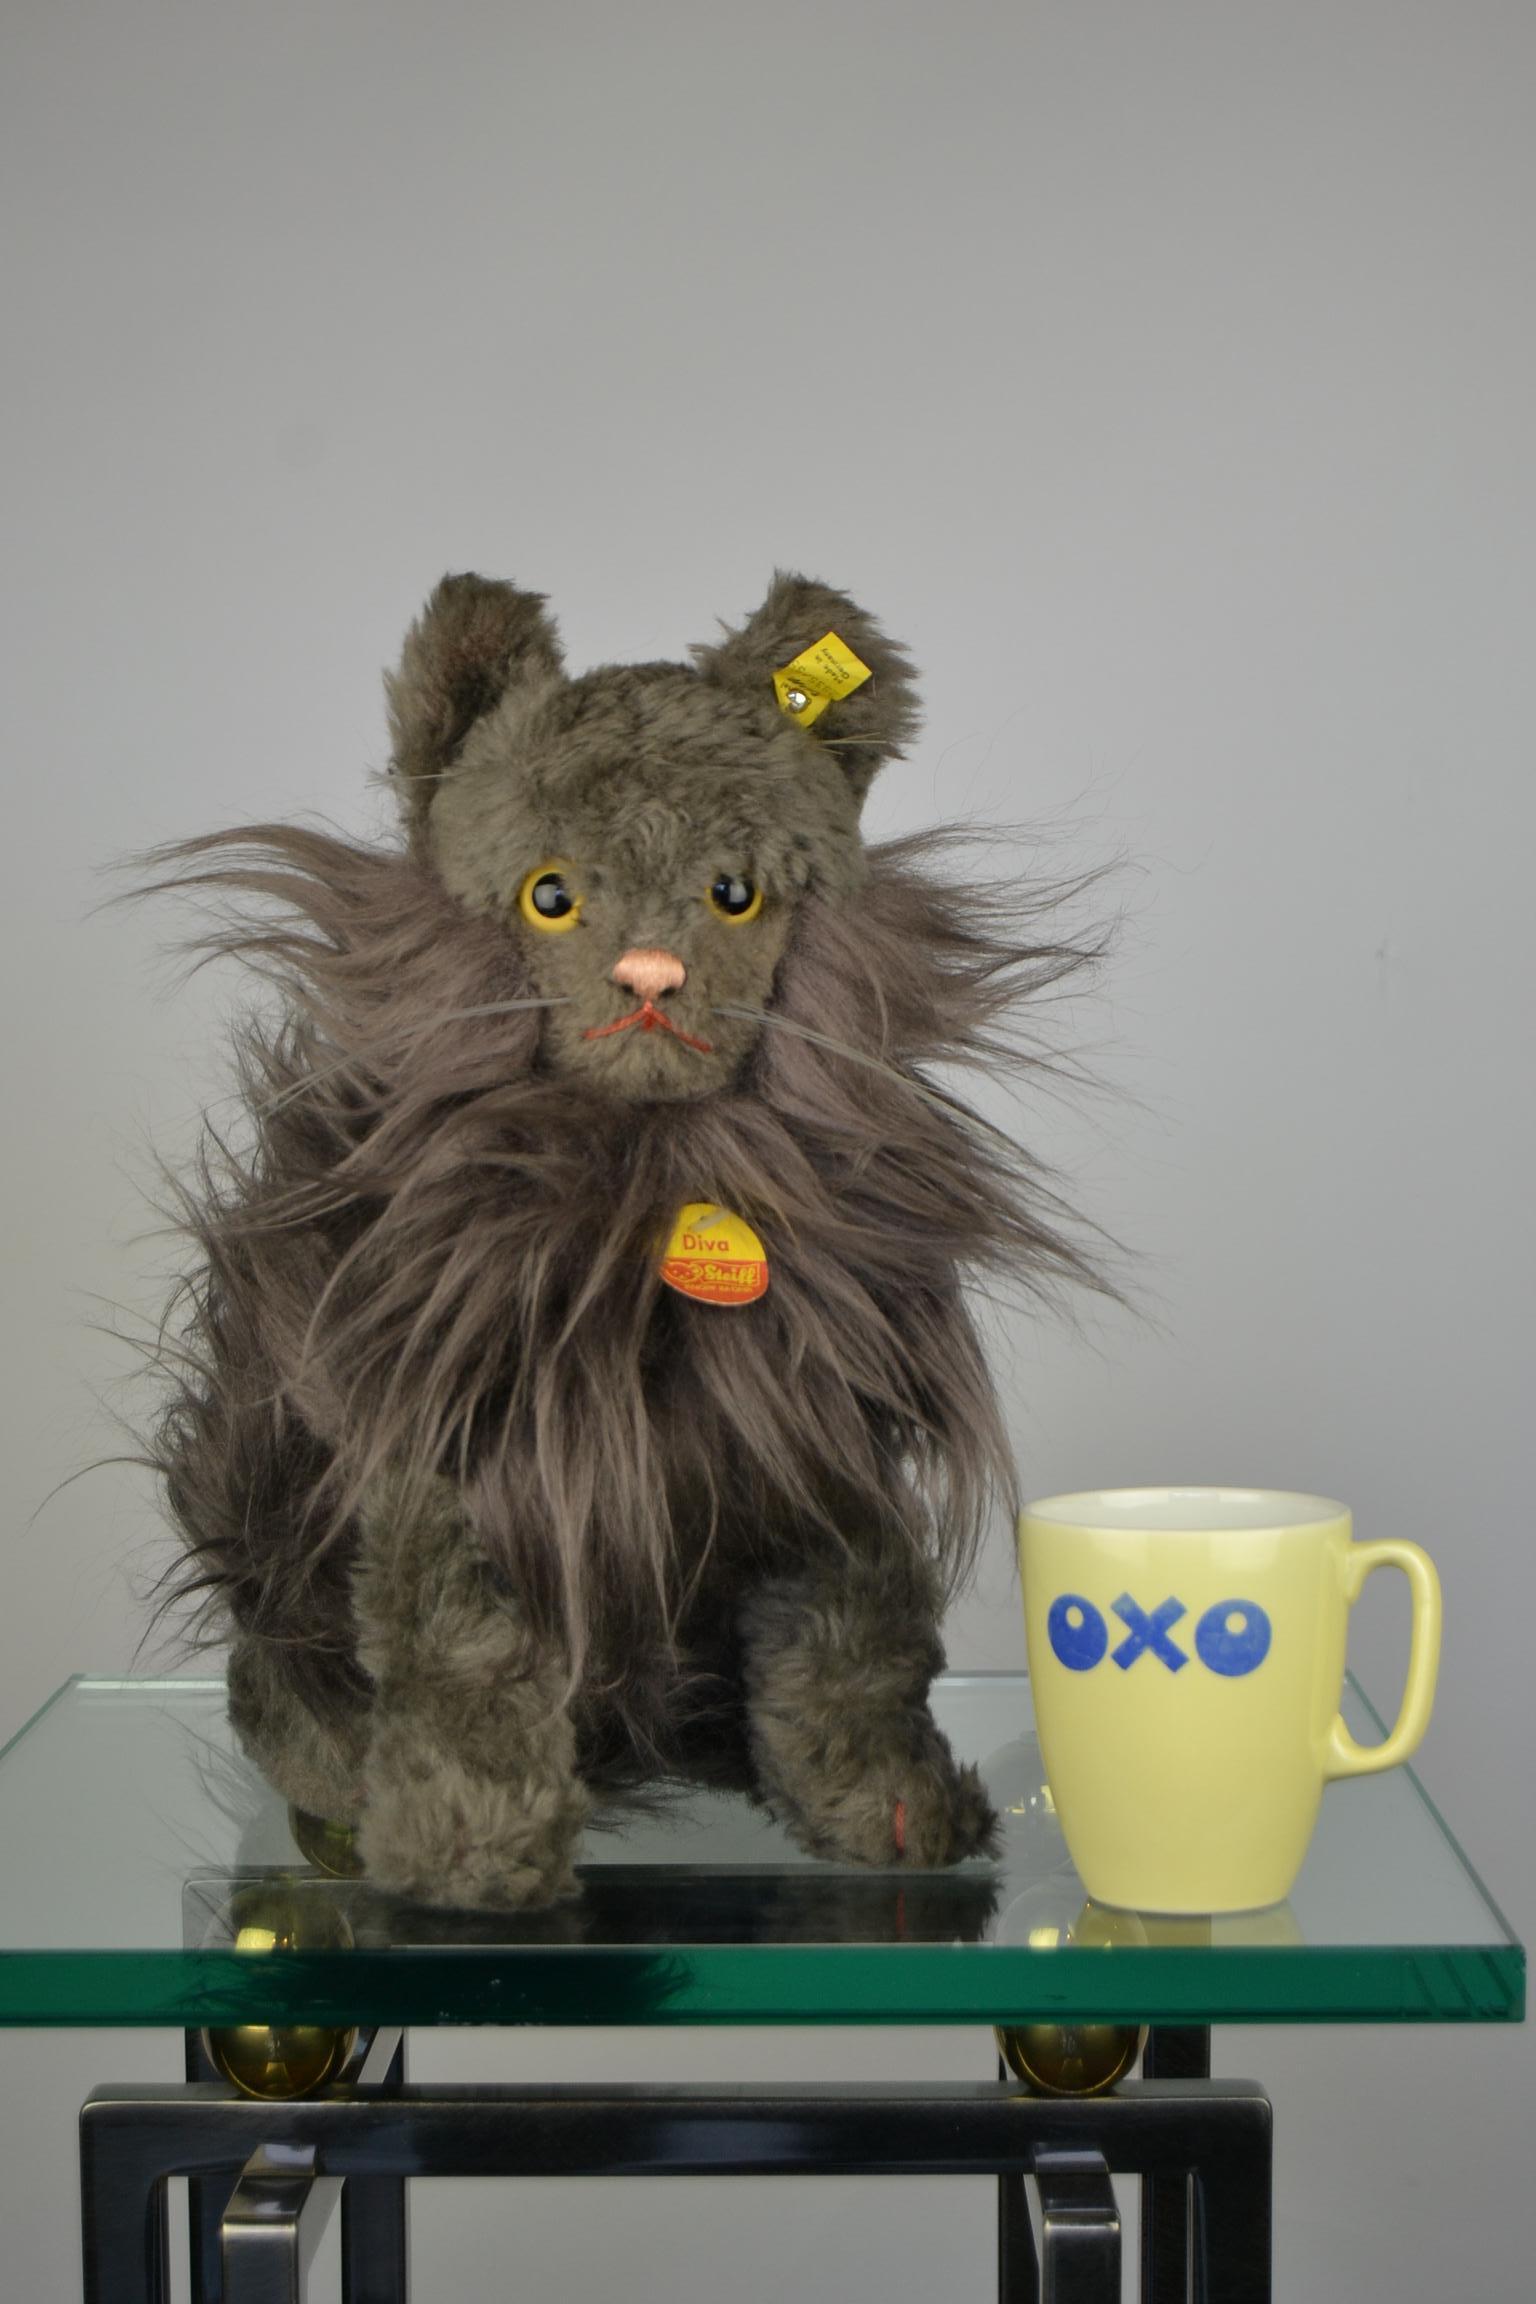 Gray sitting Persian cat toy doll called Diva.
Lifesize vintage toy cat with rotating head and bow around the neck.
Made from 1968-1978. Complete with label and button in the ear and label on the neck. Numbered 2835/35. 

Great home decor for